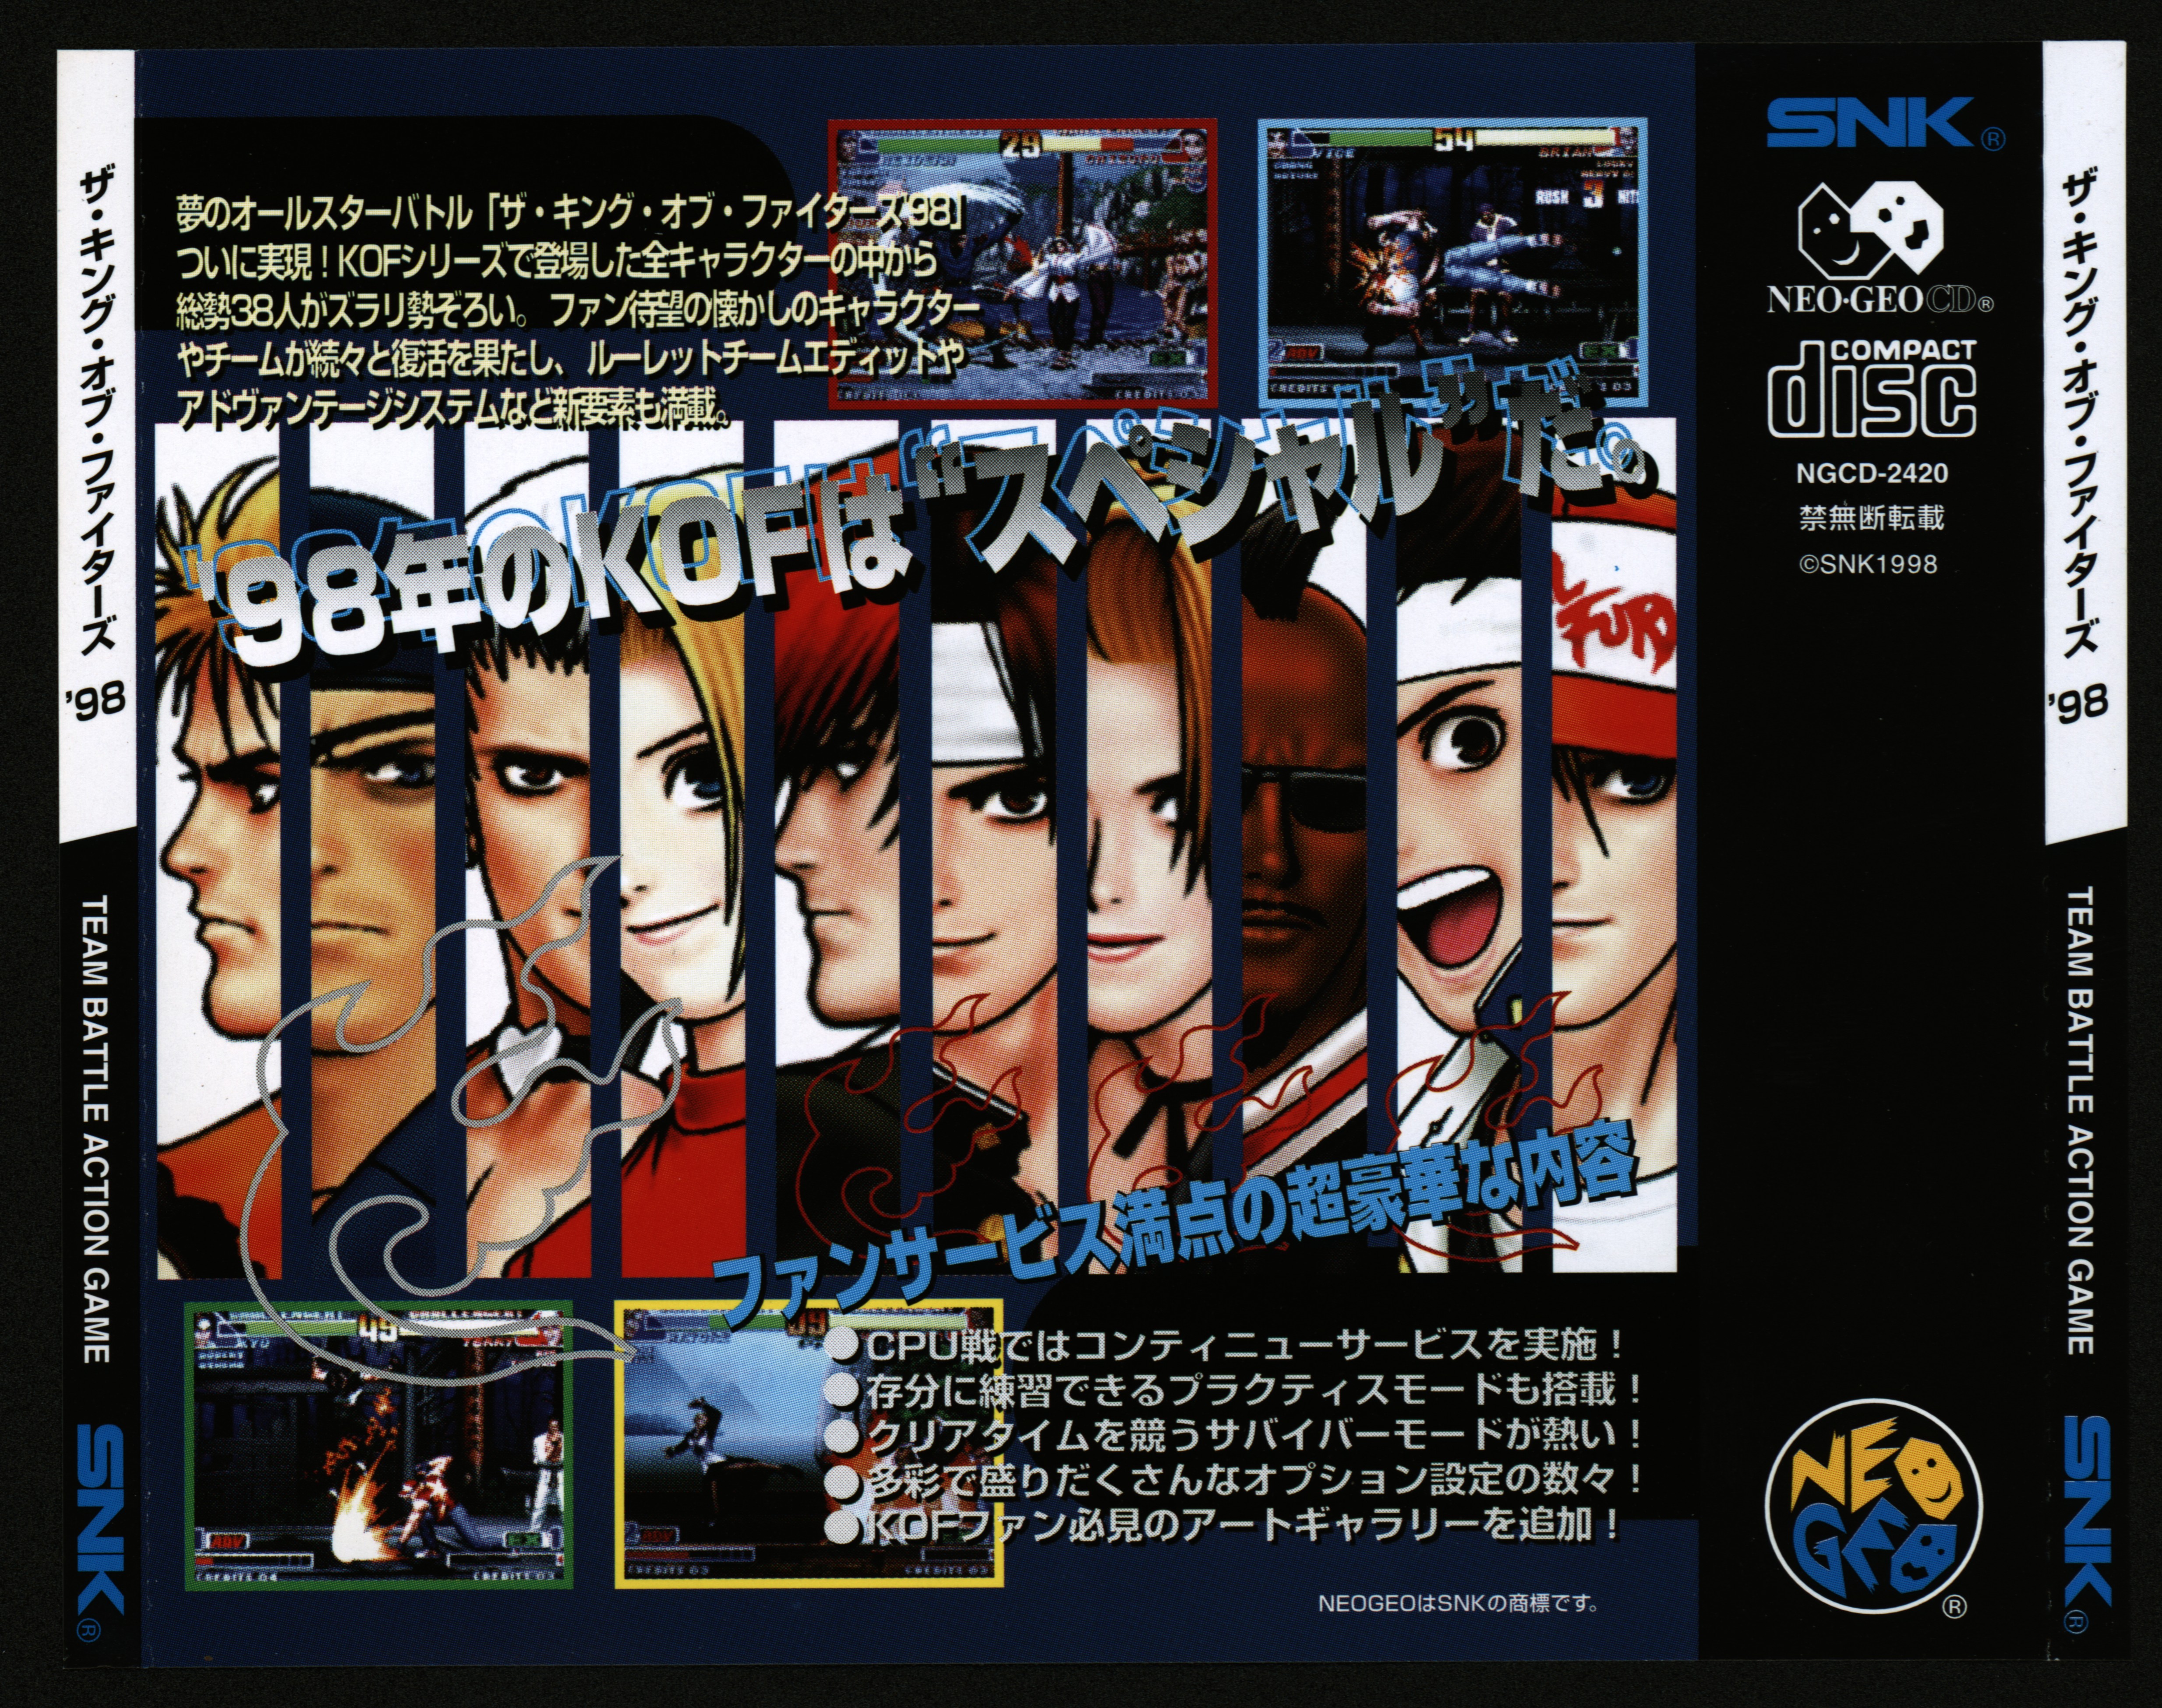 Neogeo CD software The King of Fighters XII 98 (CD-ROM), Game